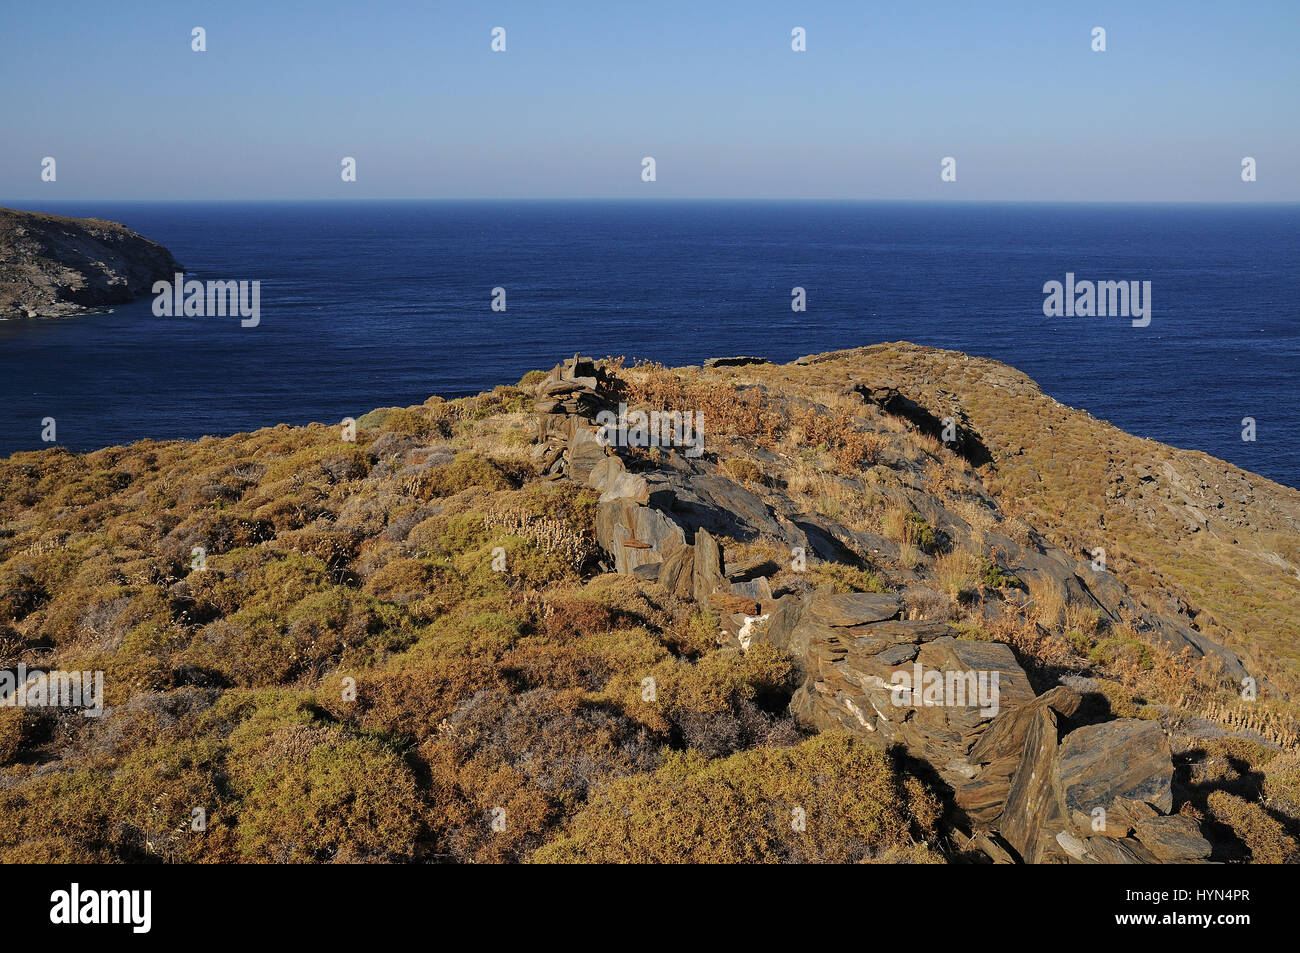 Andros island Landscapes.Cyclades Greece. Stock Photo